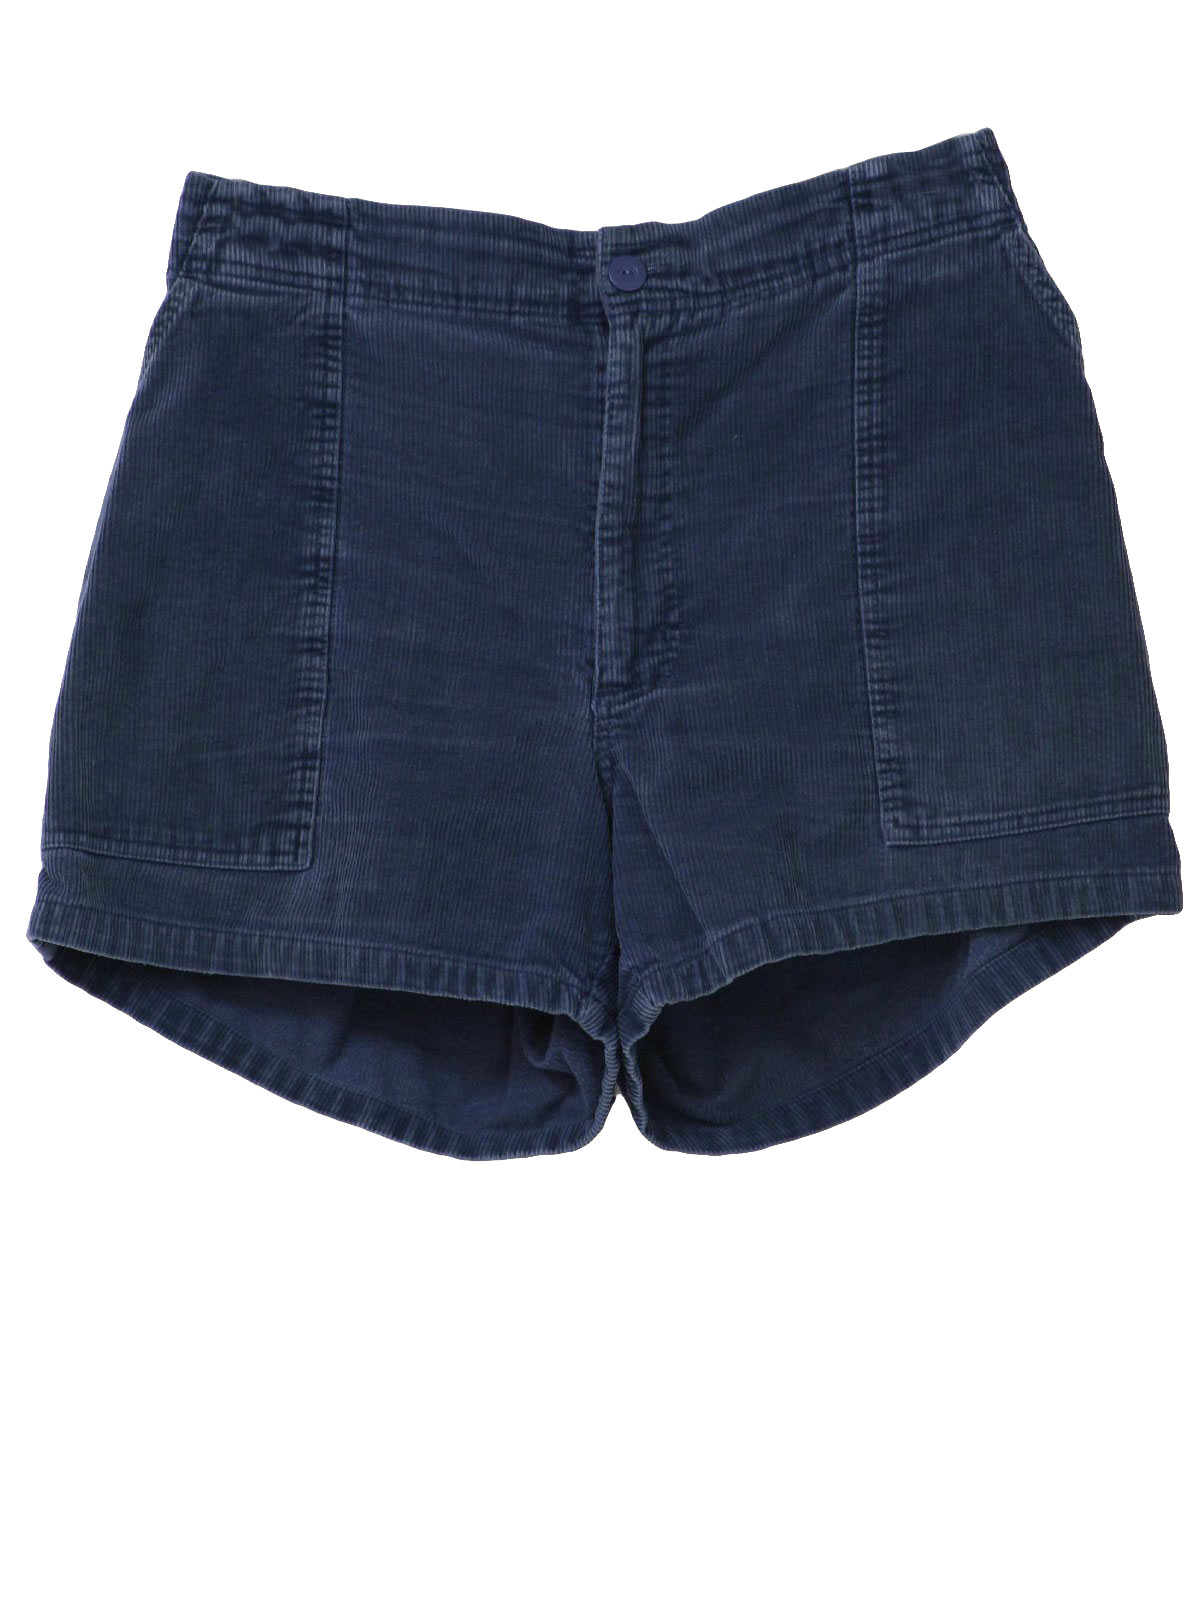 Eighties Vintage Shorts: 80s style (made in 90s) -Rip Cord- Mens navy ...